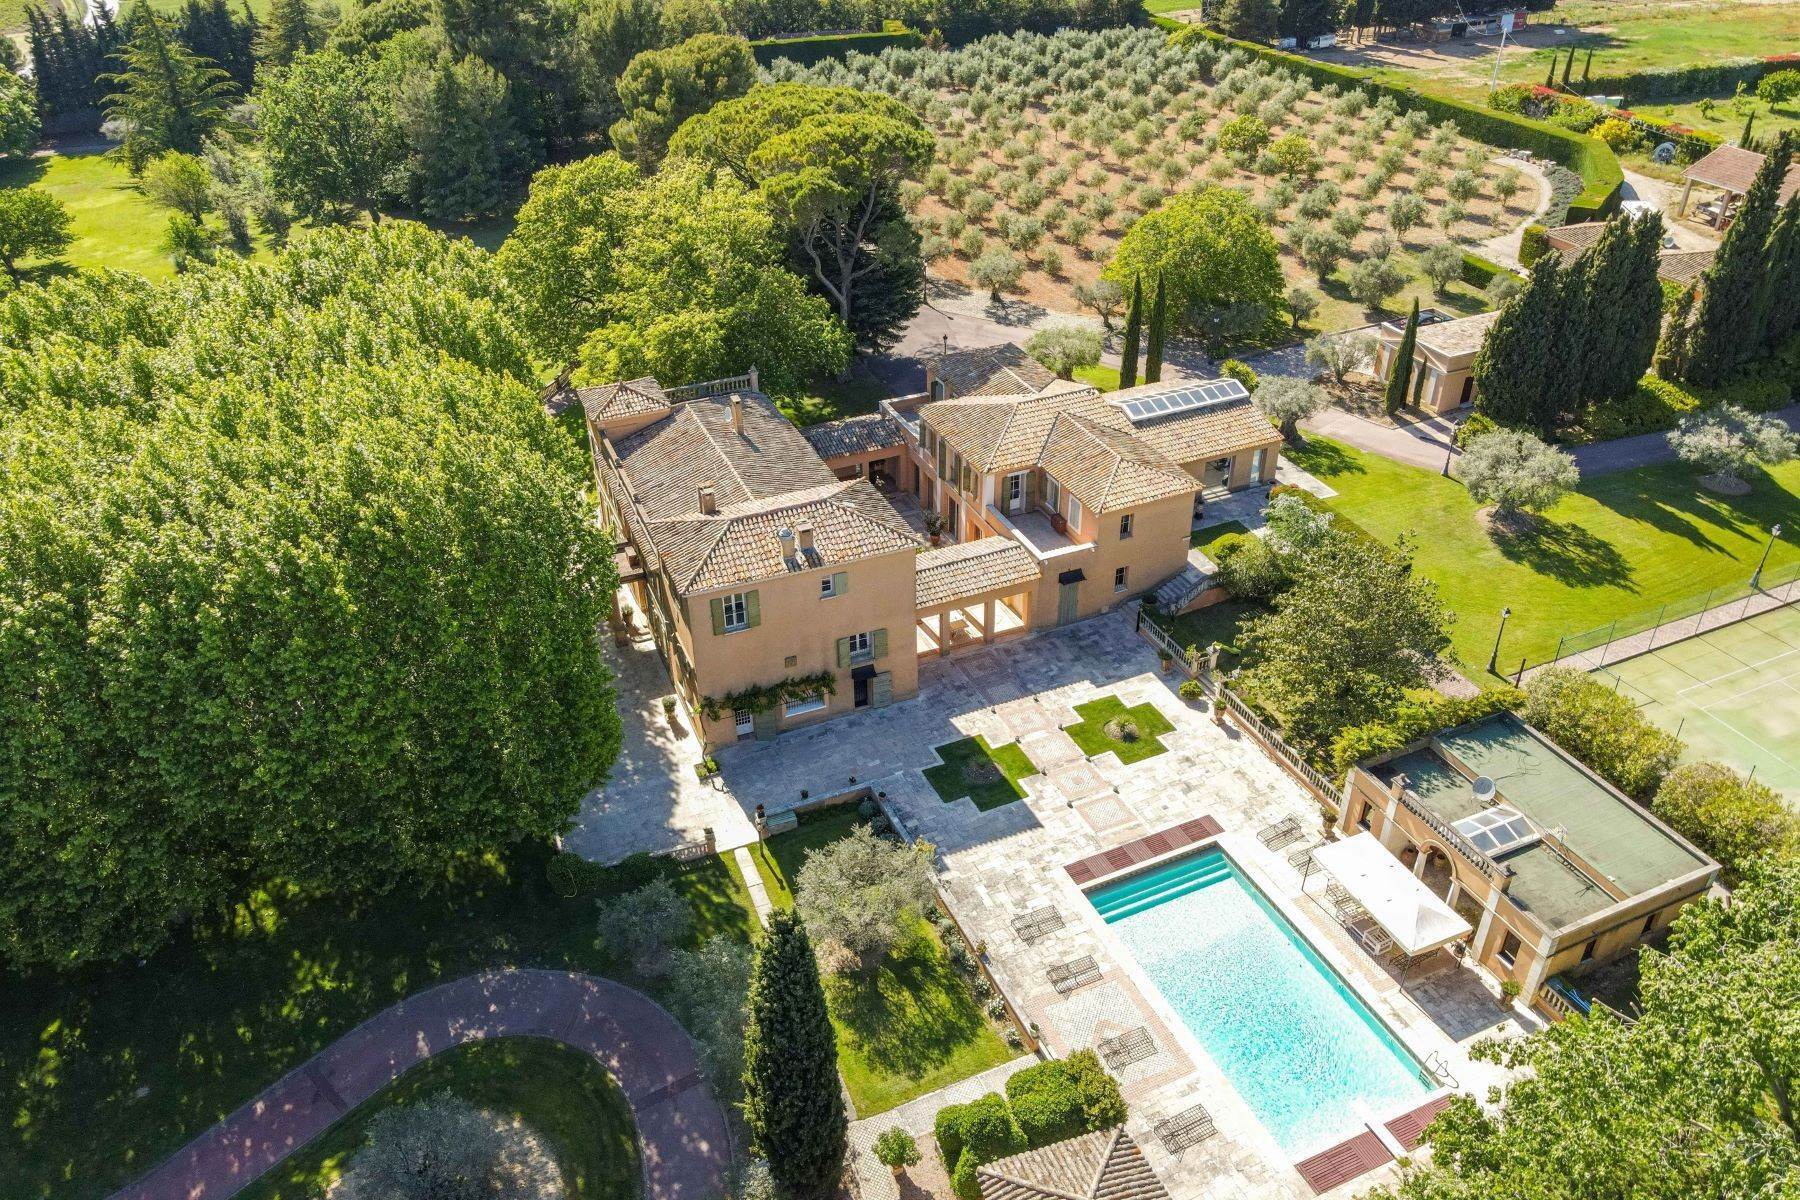 Single Family Homes for Sale at Exceptional estate of 1300 m² for sale in Aix-en-Provence. Aix-En-Provence, Provence-Alpes-Cote D'Azur 13100 France